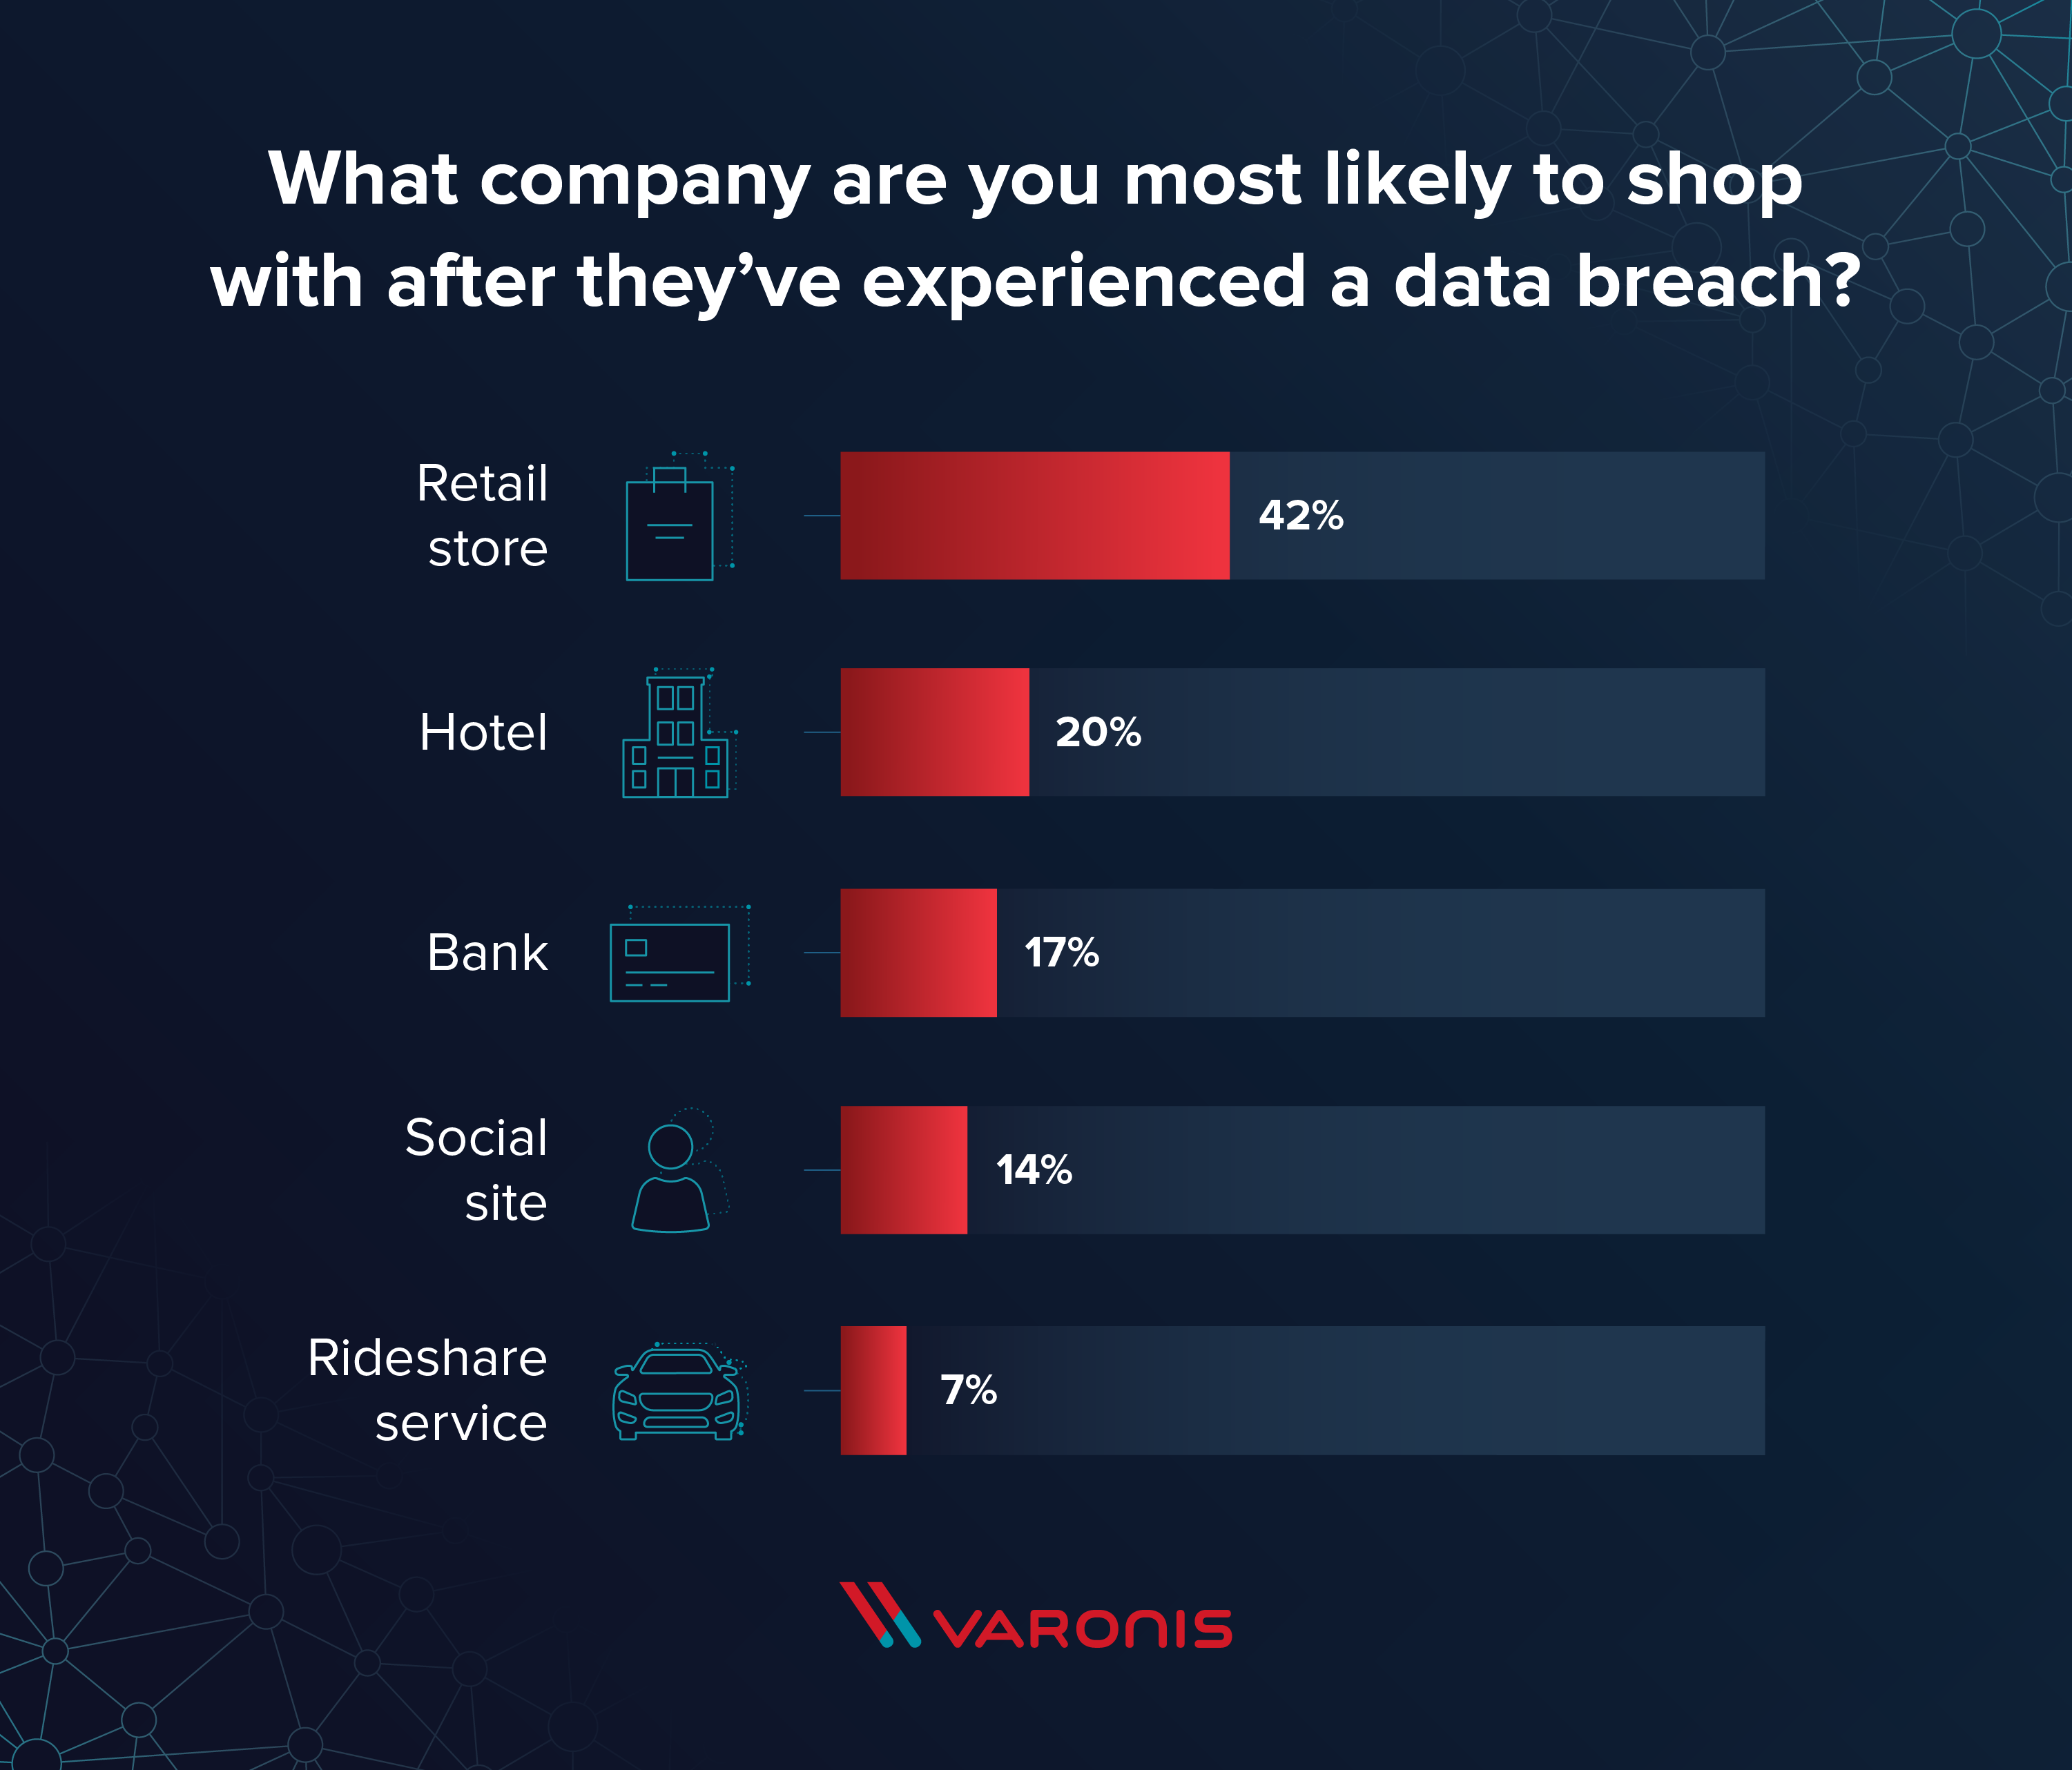 what company are you least likely to shop with after a data breach